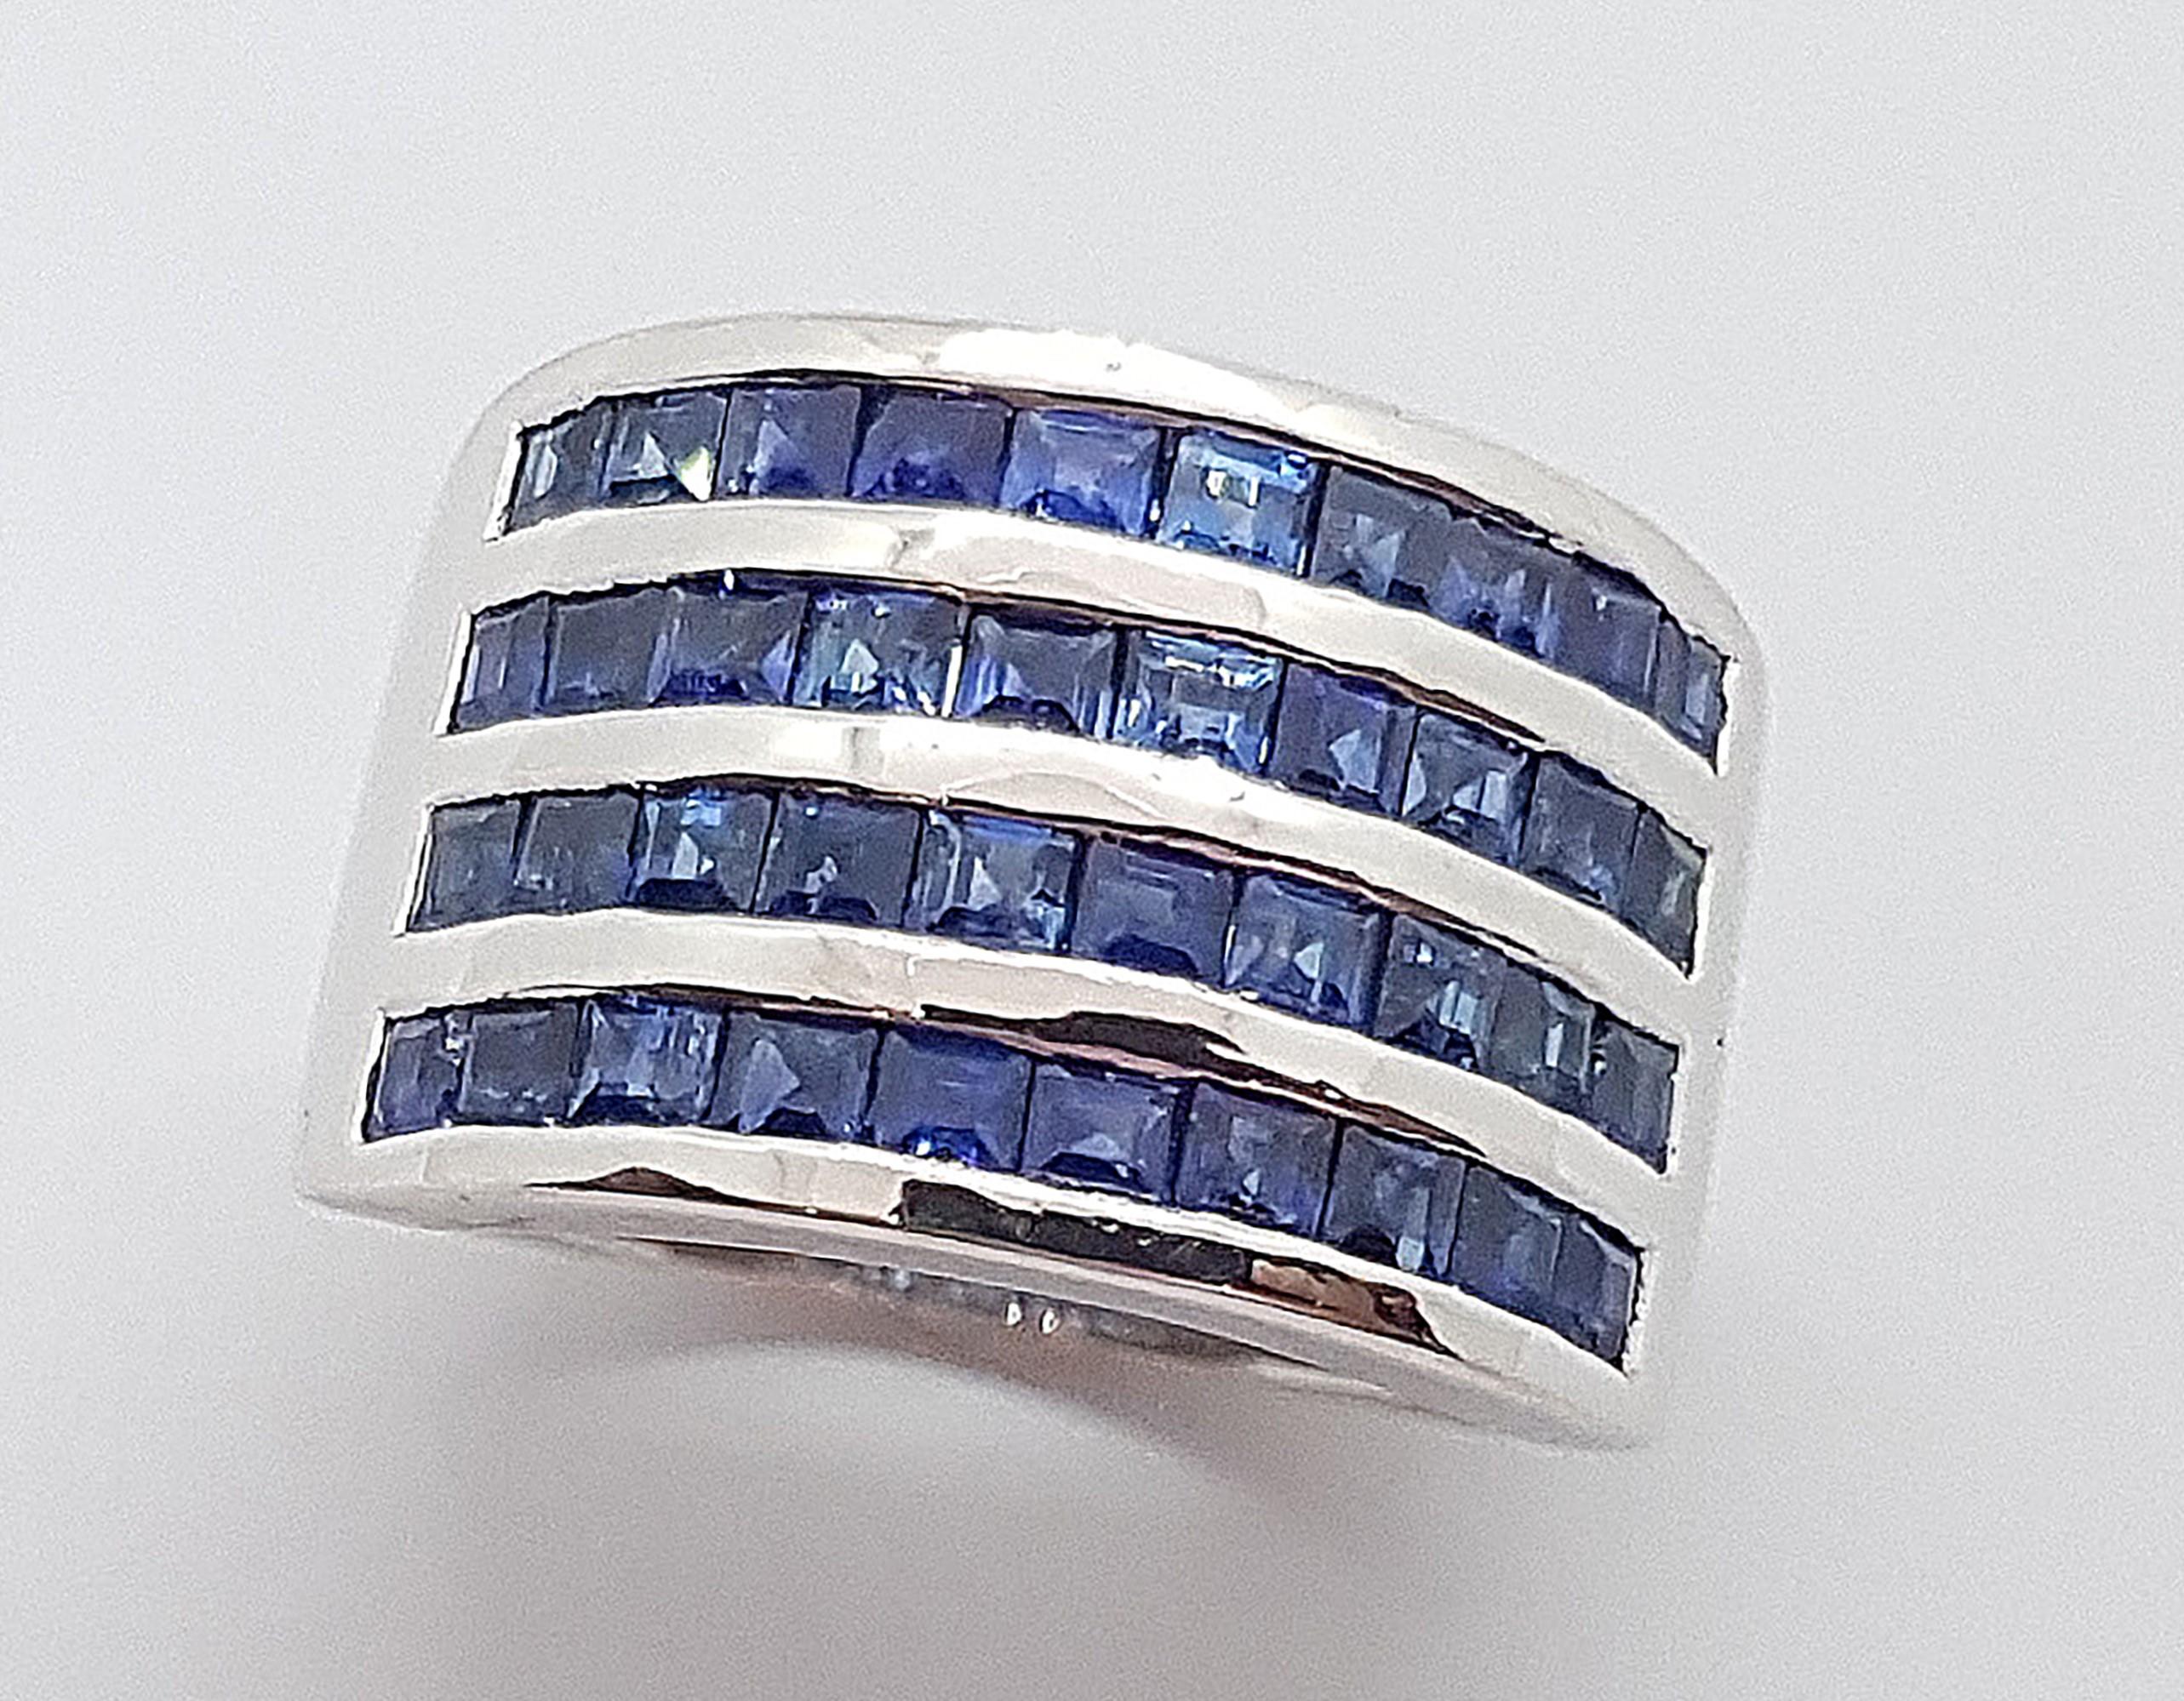 Blue Sapphire 2.88 carats Ring set in 18 Karat White Gold Settings

Width:  2.0 cm 
Length: 1.2 cm
Ring Size: 54
Total Weight: 12.32 grams

